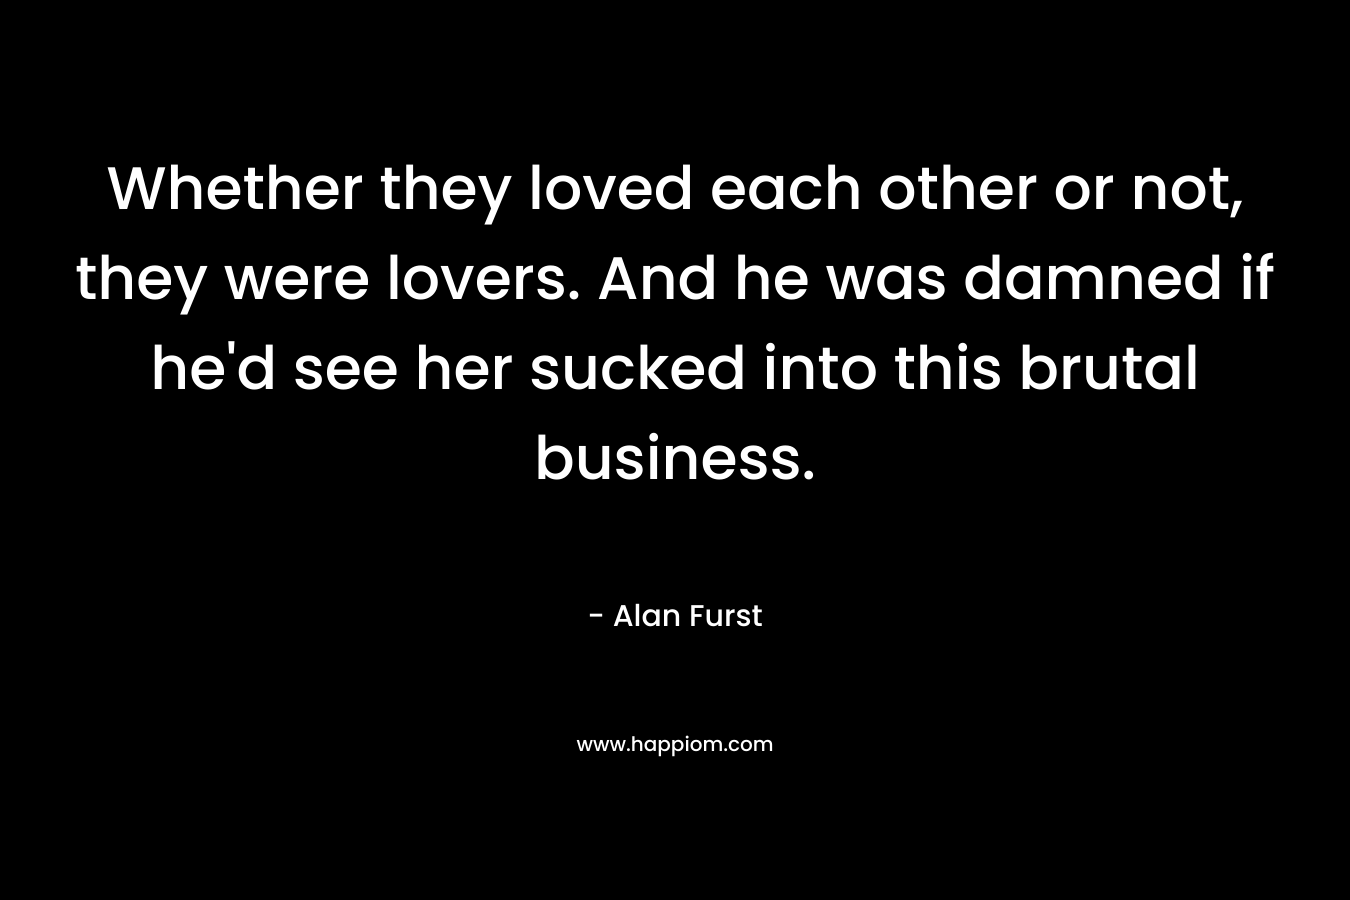 Whether they loved each other or not, they were lovers. And he was damned if he’d see her sucked into this brutal business. – Alan Furst